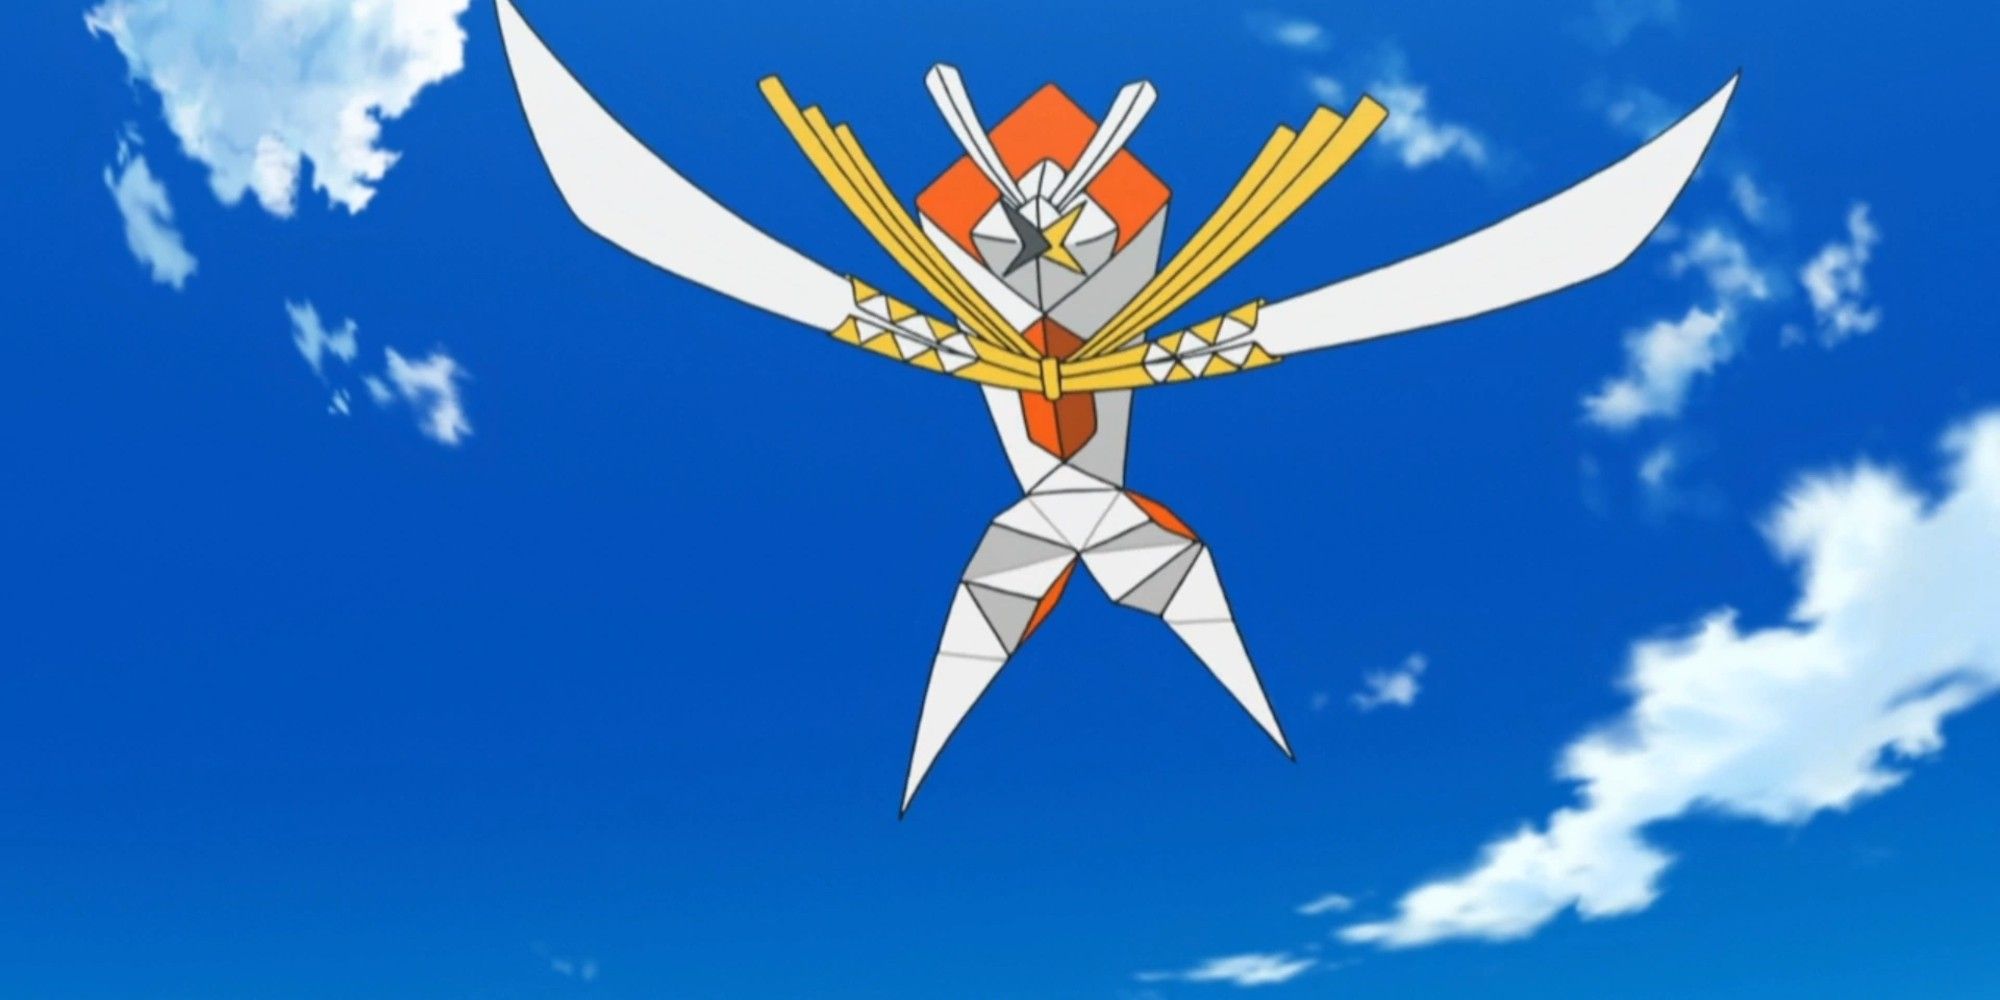 Kartana in the air from the anime floating